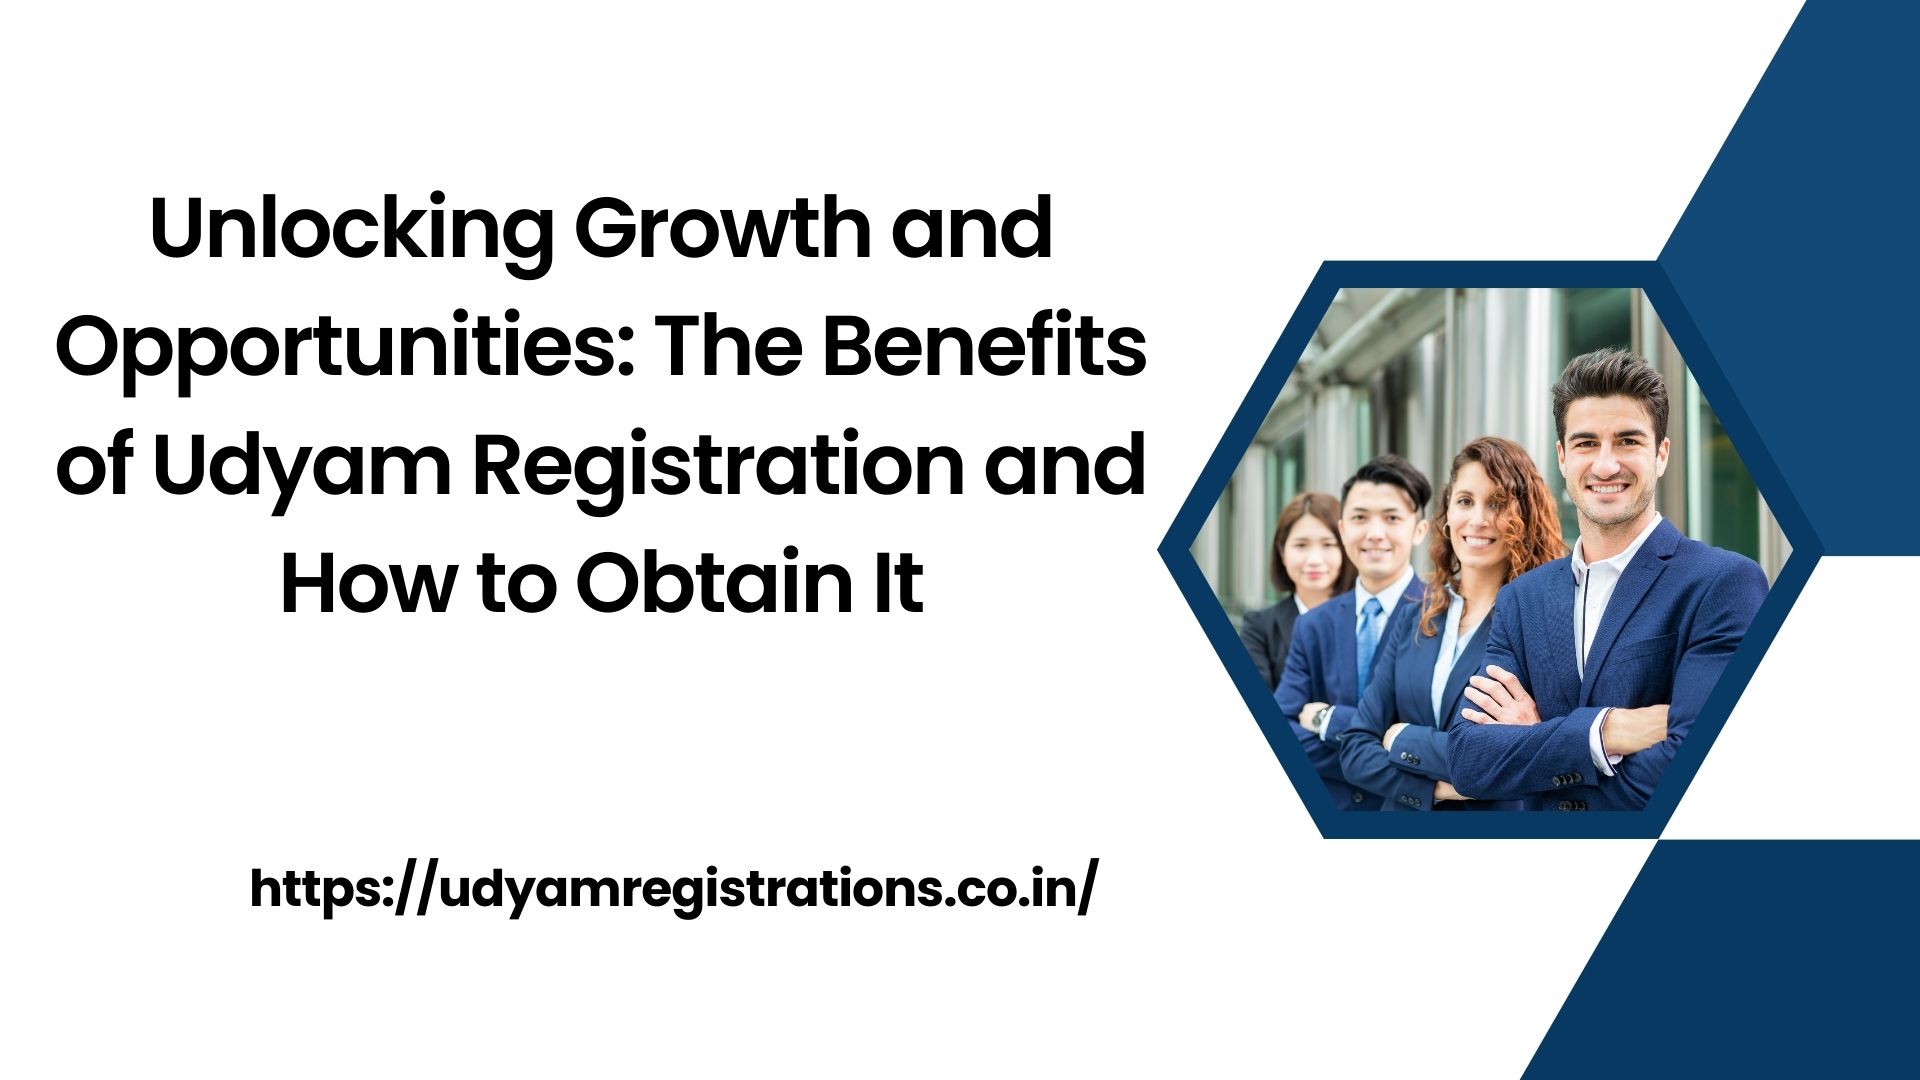 Unlocking Growth and Opportunities: The Benefits of Udyam Registration and How to Obtain It